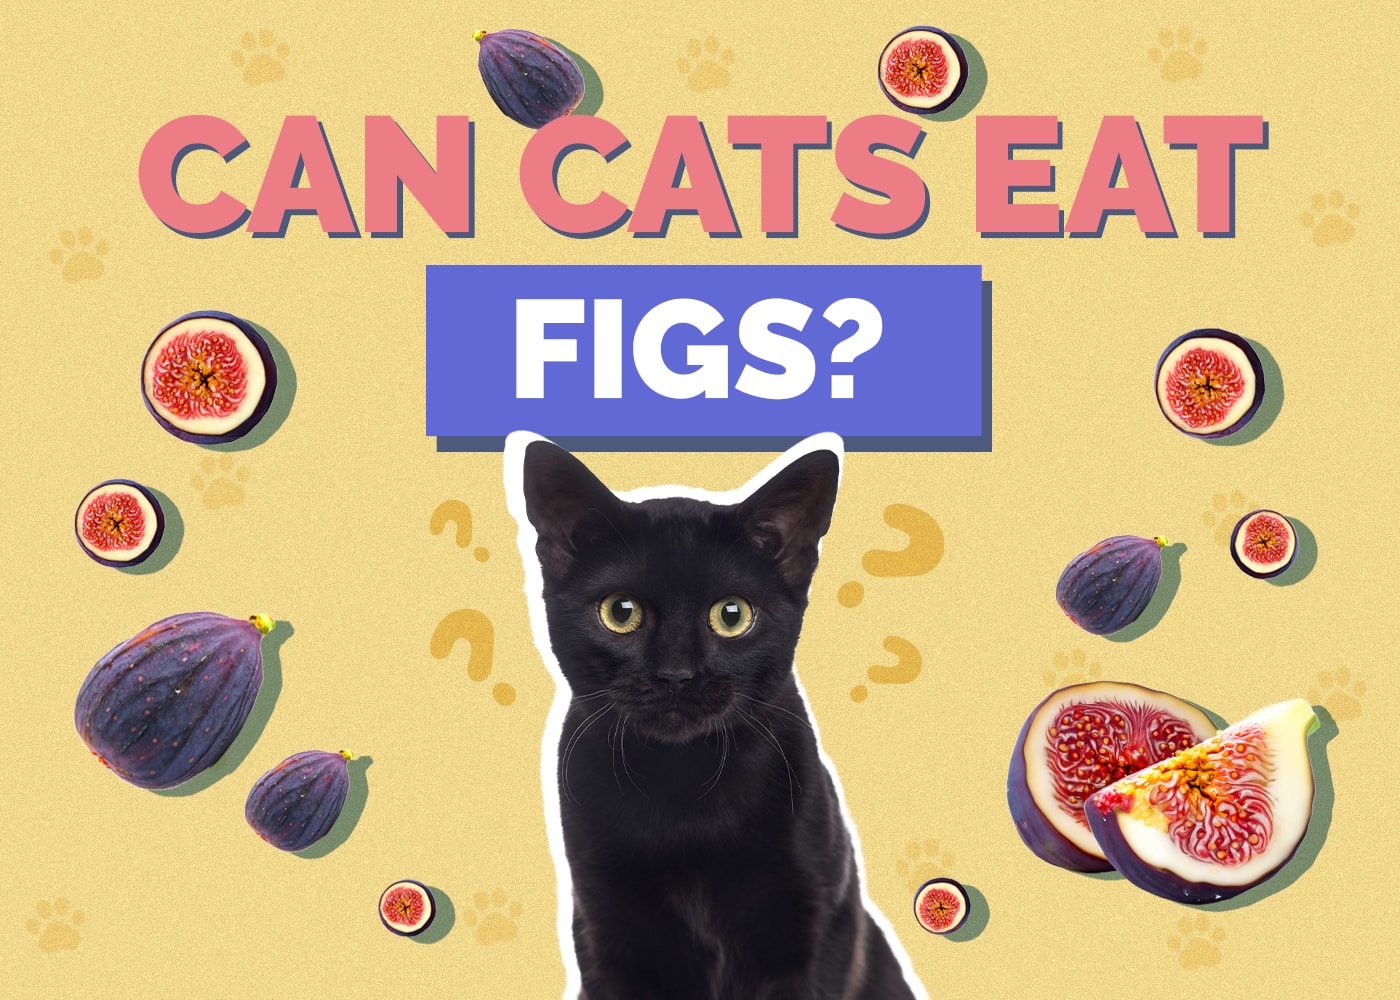 Can Cats Eat figs